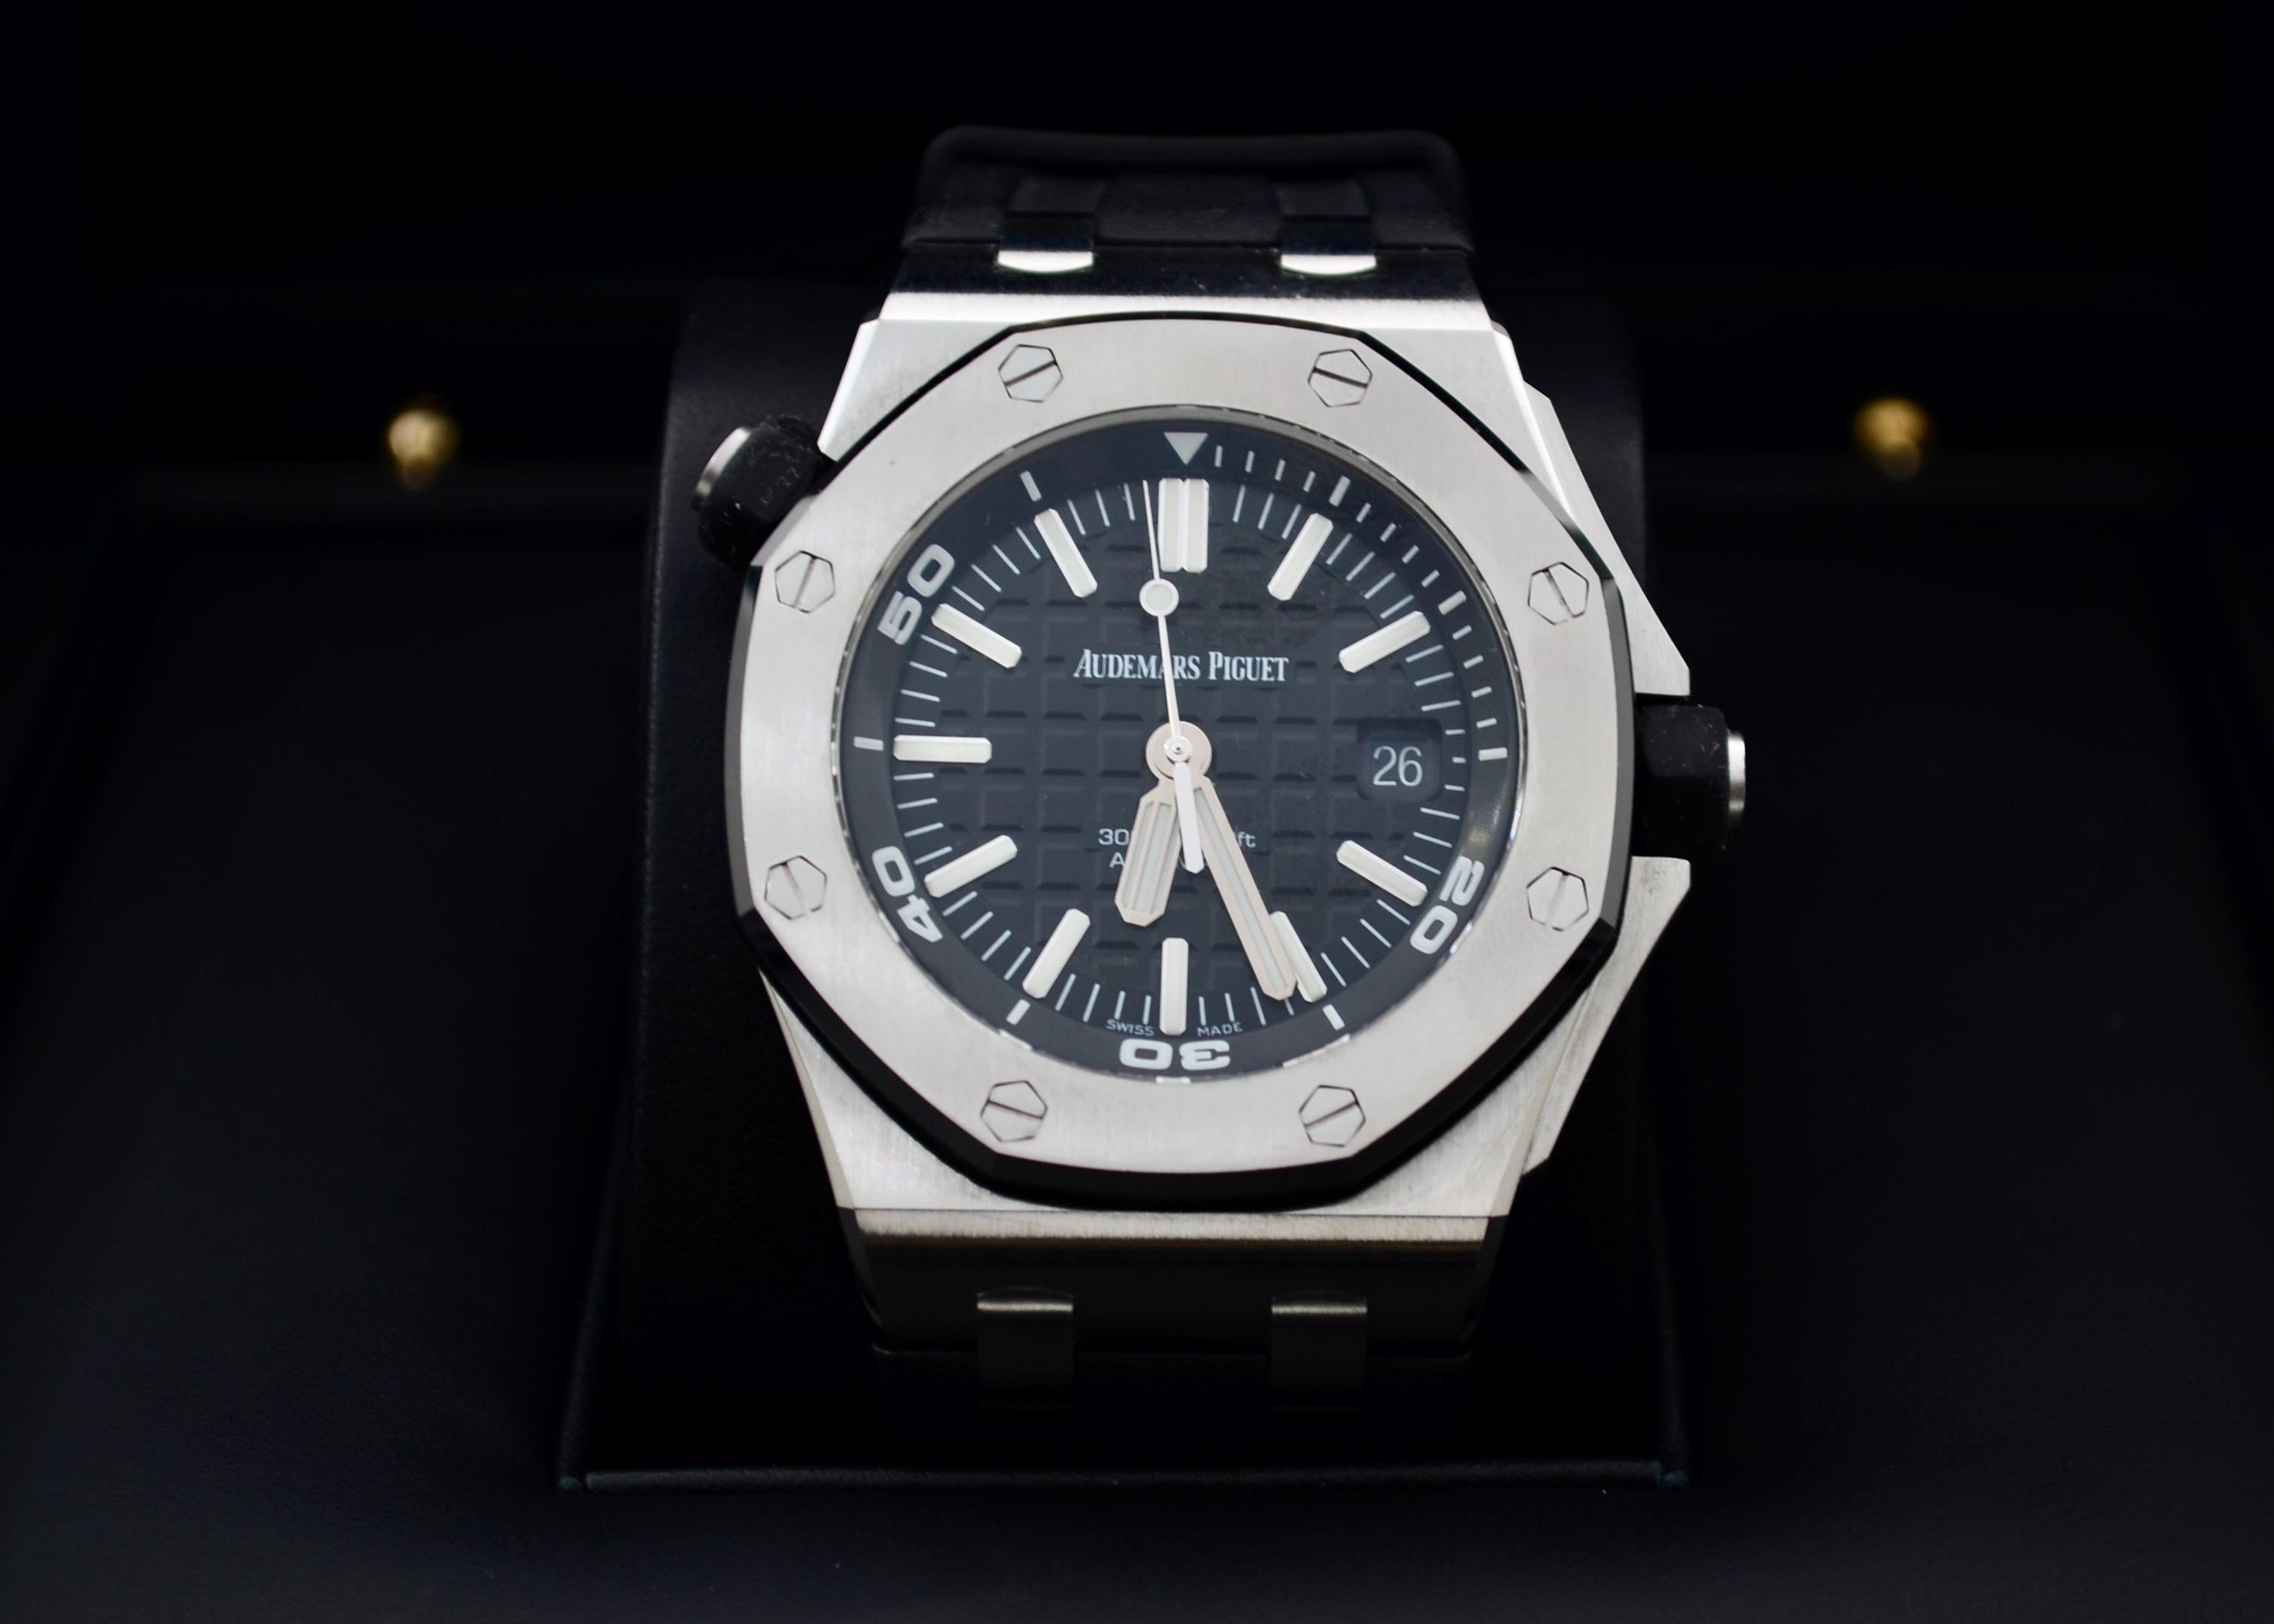 The watch is in a very good condition and it’s working well. The watch comes with the original box and documents, along with an AGS Jewelry warranty card. The Audemars Piguet Royal Oak Offshore Diver 42mm (Reference: 15710ST.OO.A002CA.01) is a